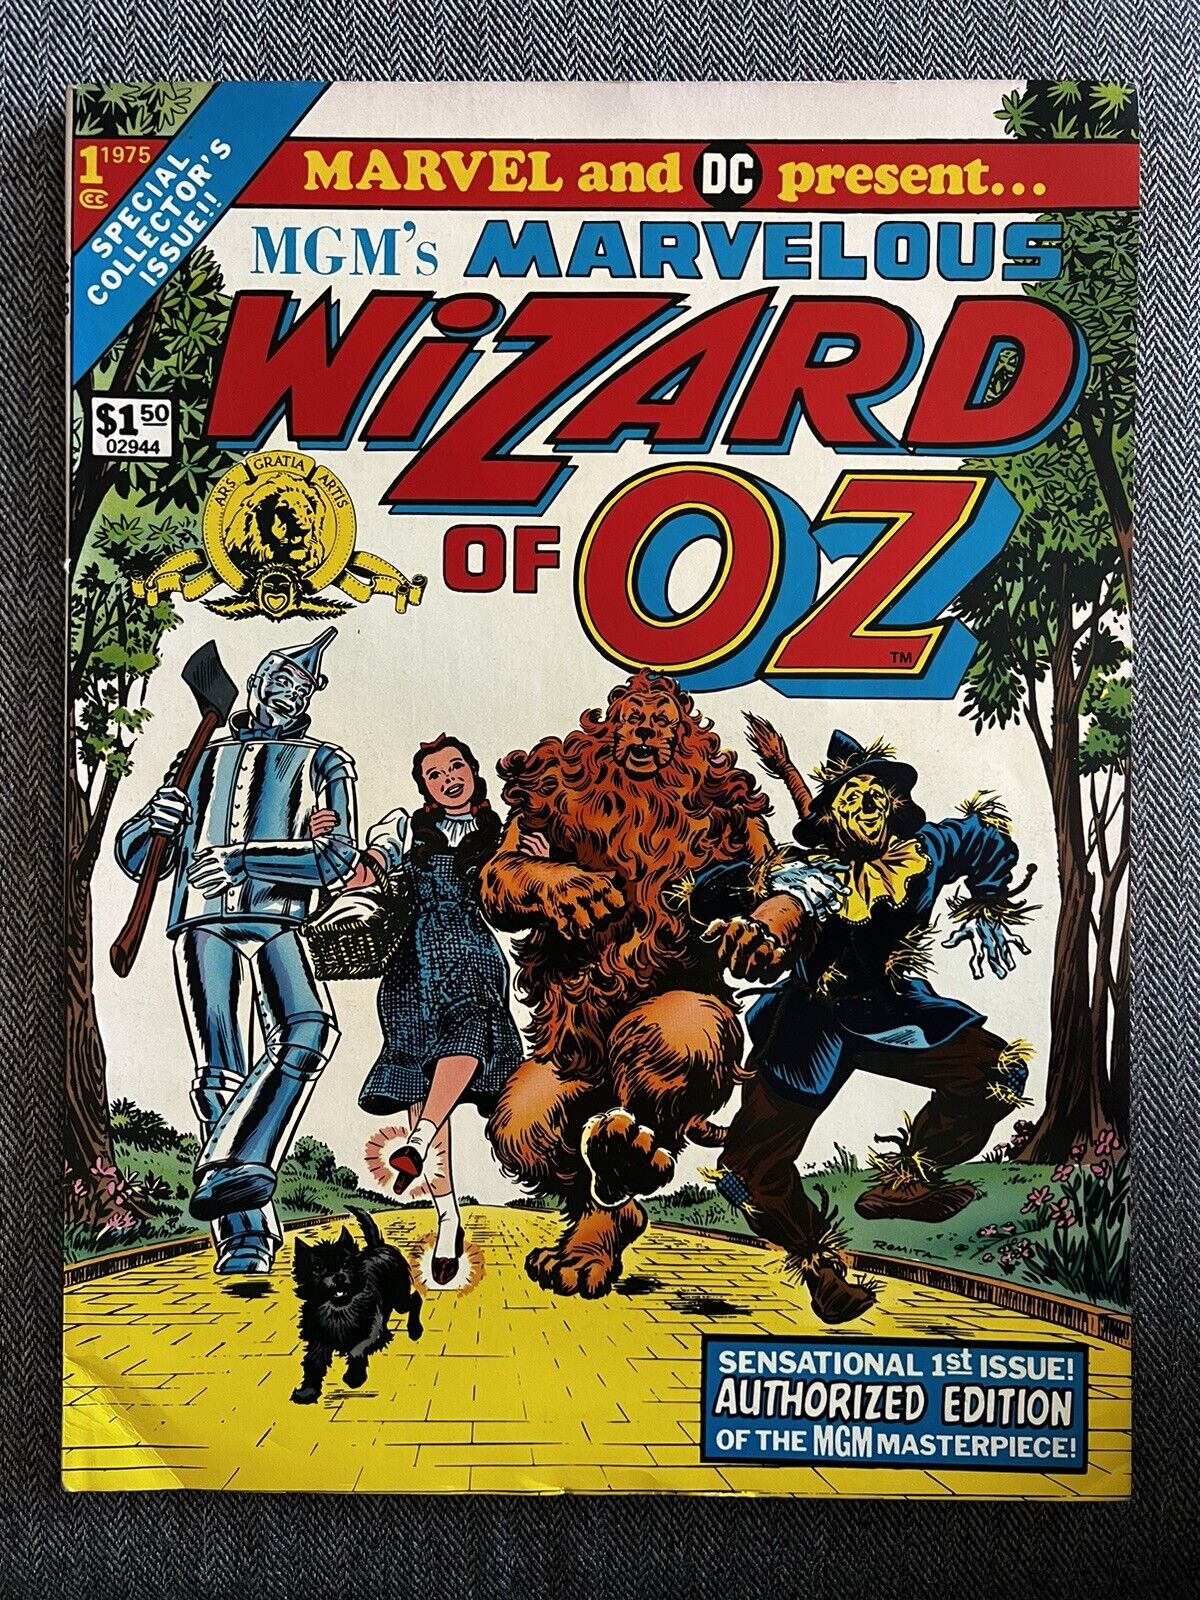 MGM’s Marvellous Wizard Of Oz 1975. Marvel and DC Oversize Collectors Issue